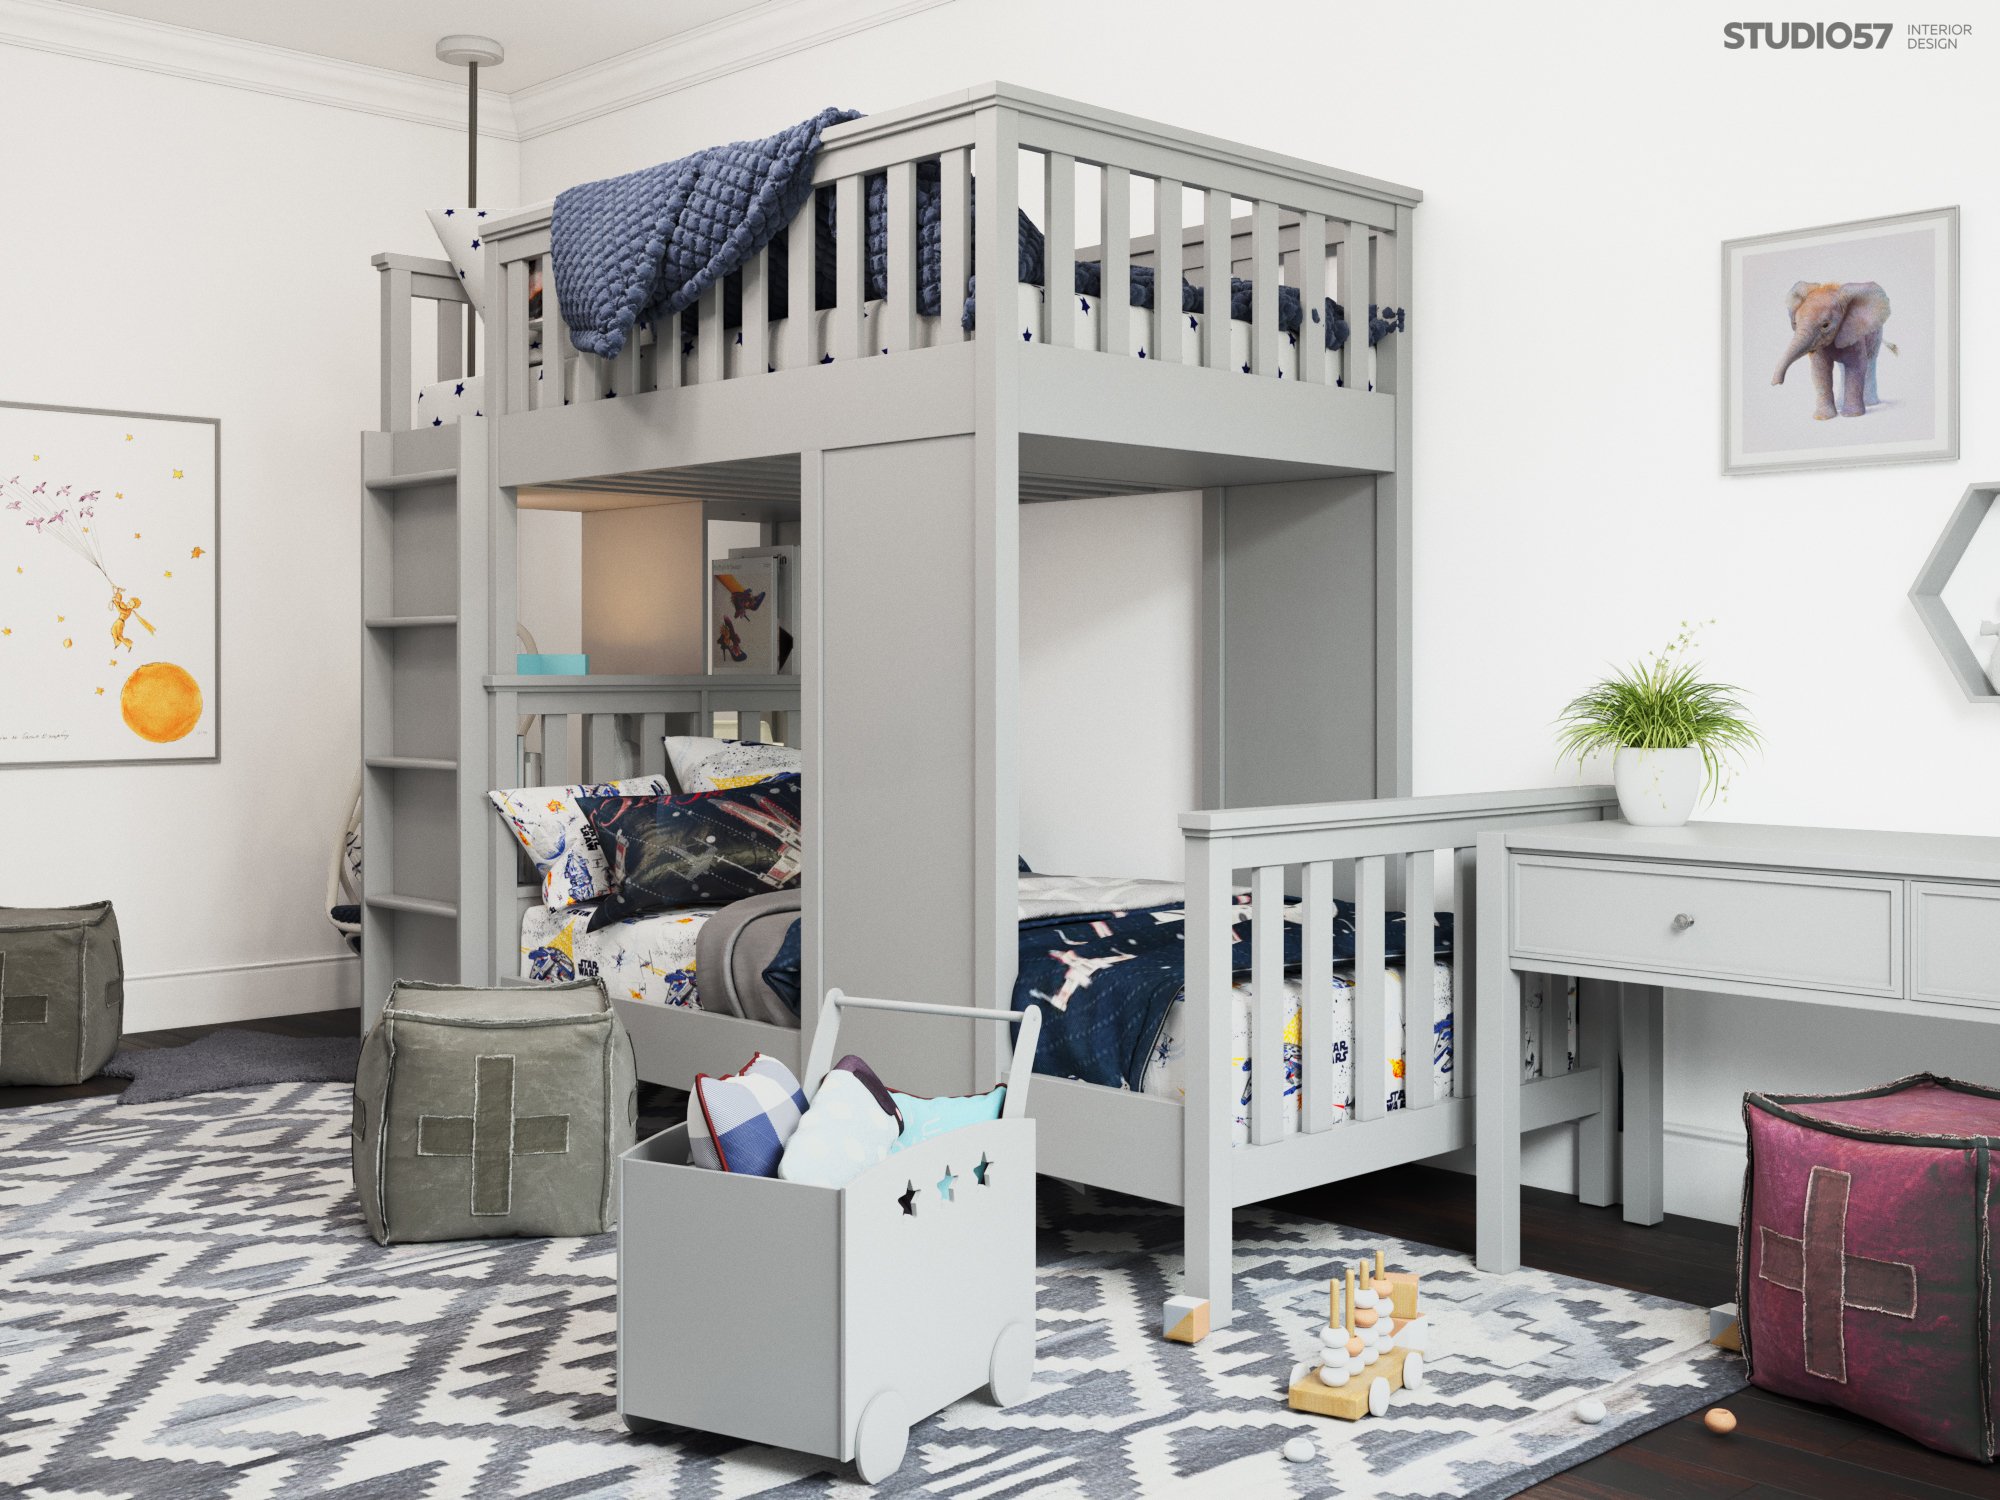 Bunk bed in a children's room photo